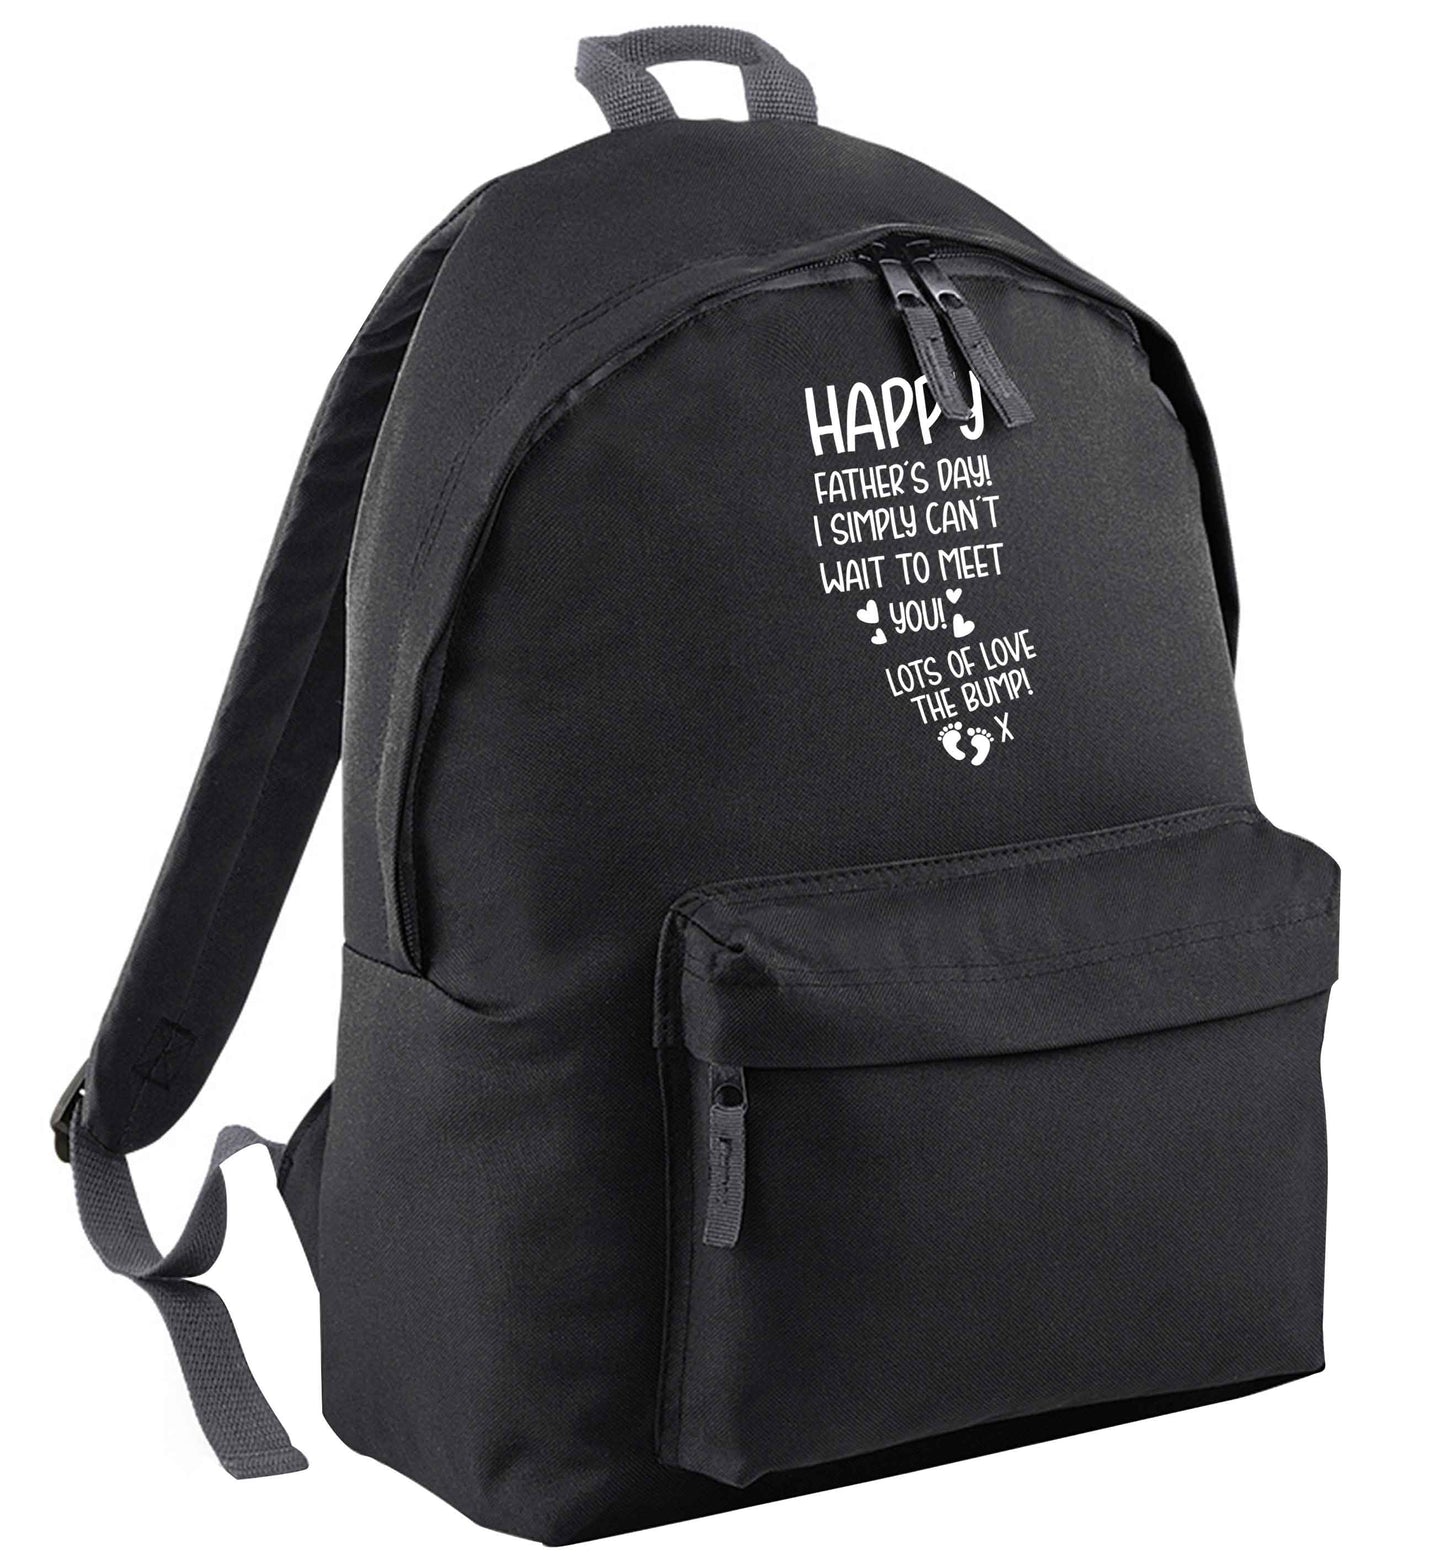 Happy Father's day daddy I can't wait to meet you lot's of love the bump! | Adults backpack